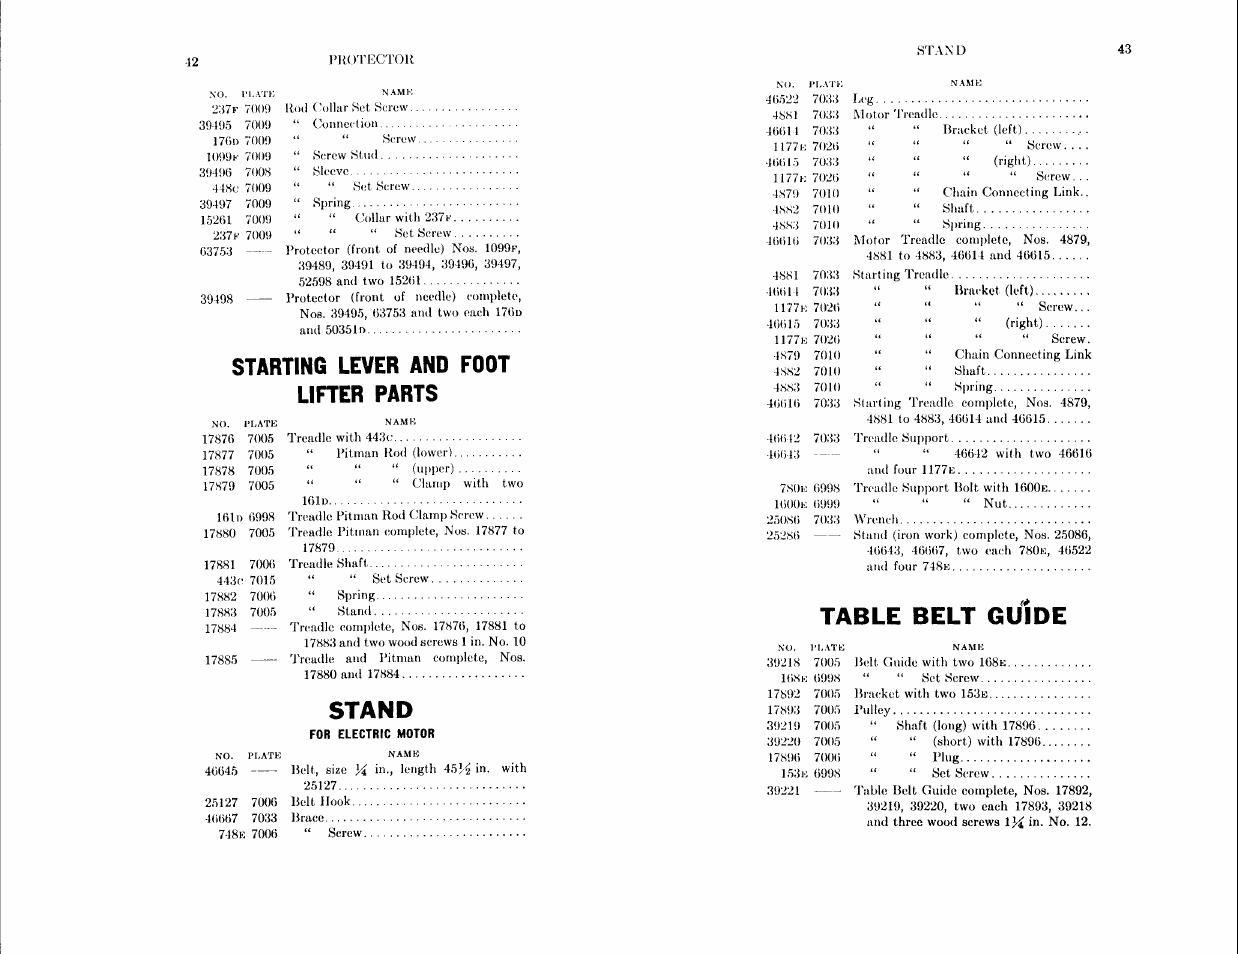 Stand, Table belt guide, Starting lever and foot lifter parts | SINGER 114-24 User Manual | Page 21 / 45